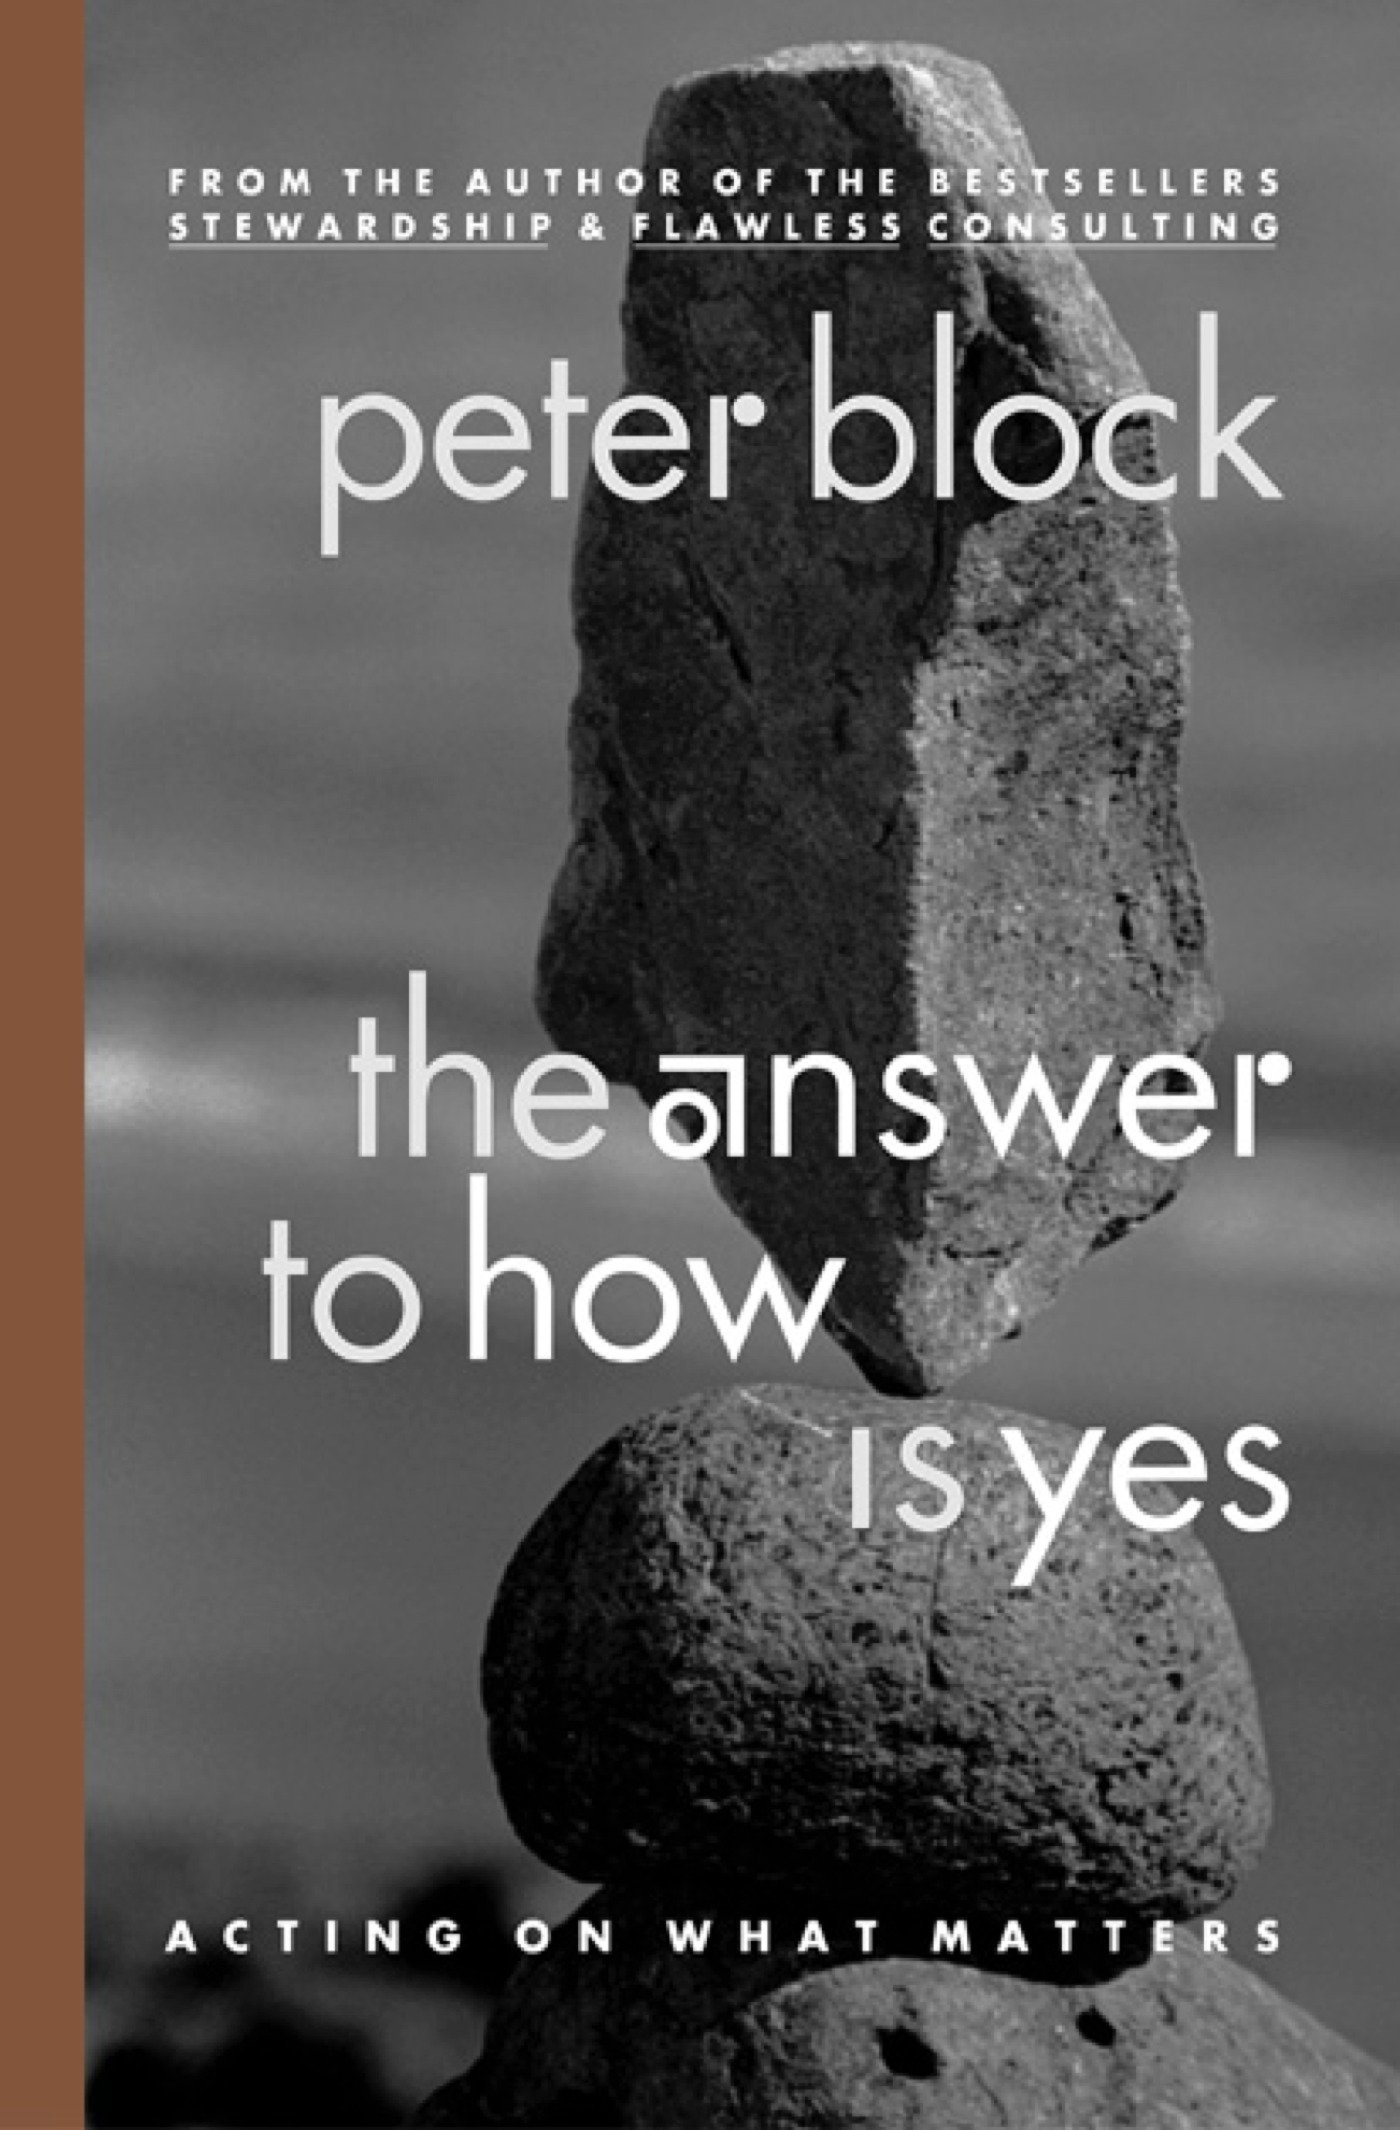 http://thehappinessedgecoaching.com/wp-content/uploads/2018/10/The-answer-to-How-is-Yes-Peter-Block.jpg